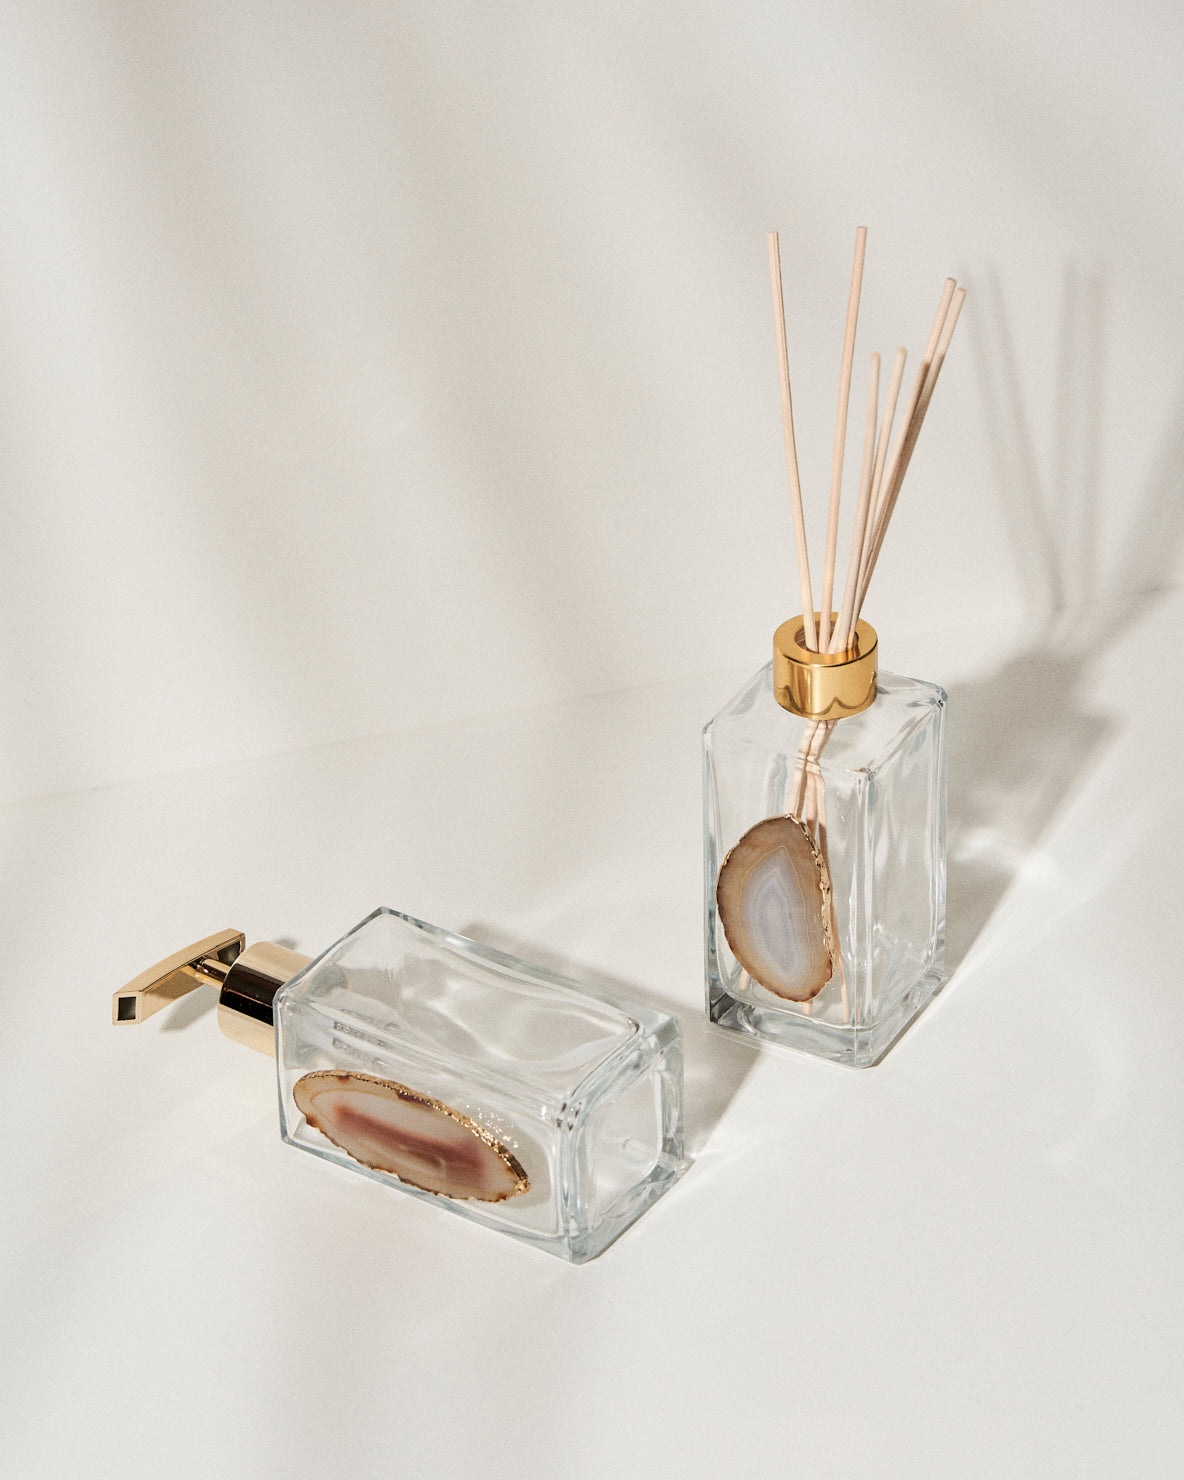 Agate Soap Dispenser and Agate Diffuser Set - Nature-Inspired Decor | Large Capacity Soap Bottle | Aroma Diffusion | Handcrafted | 5x3” on Average